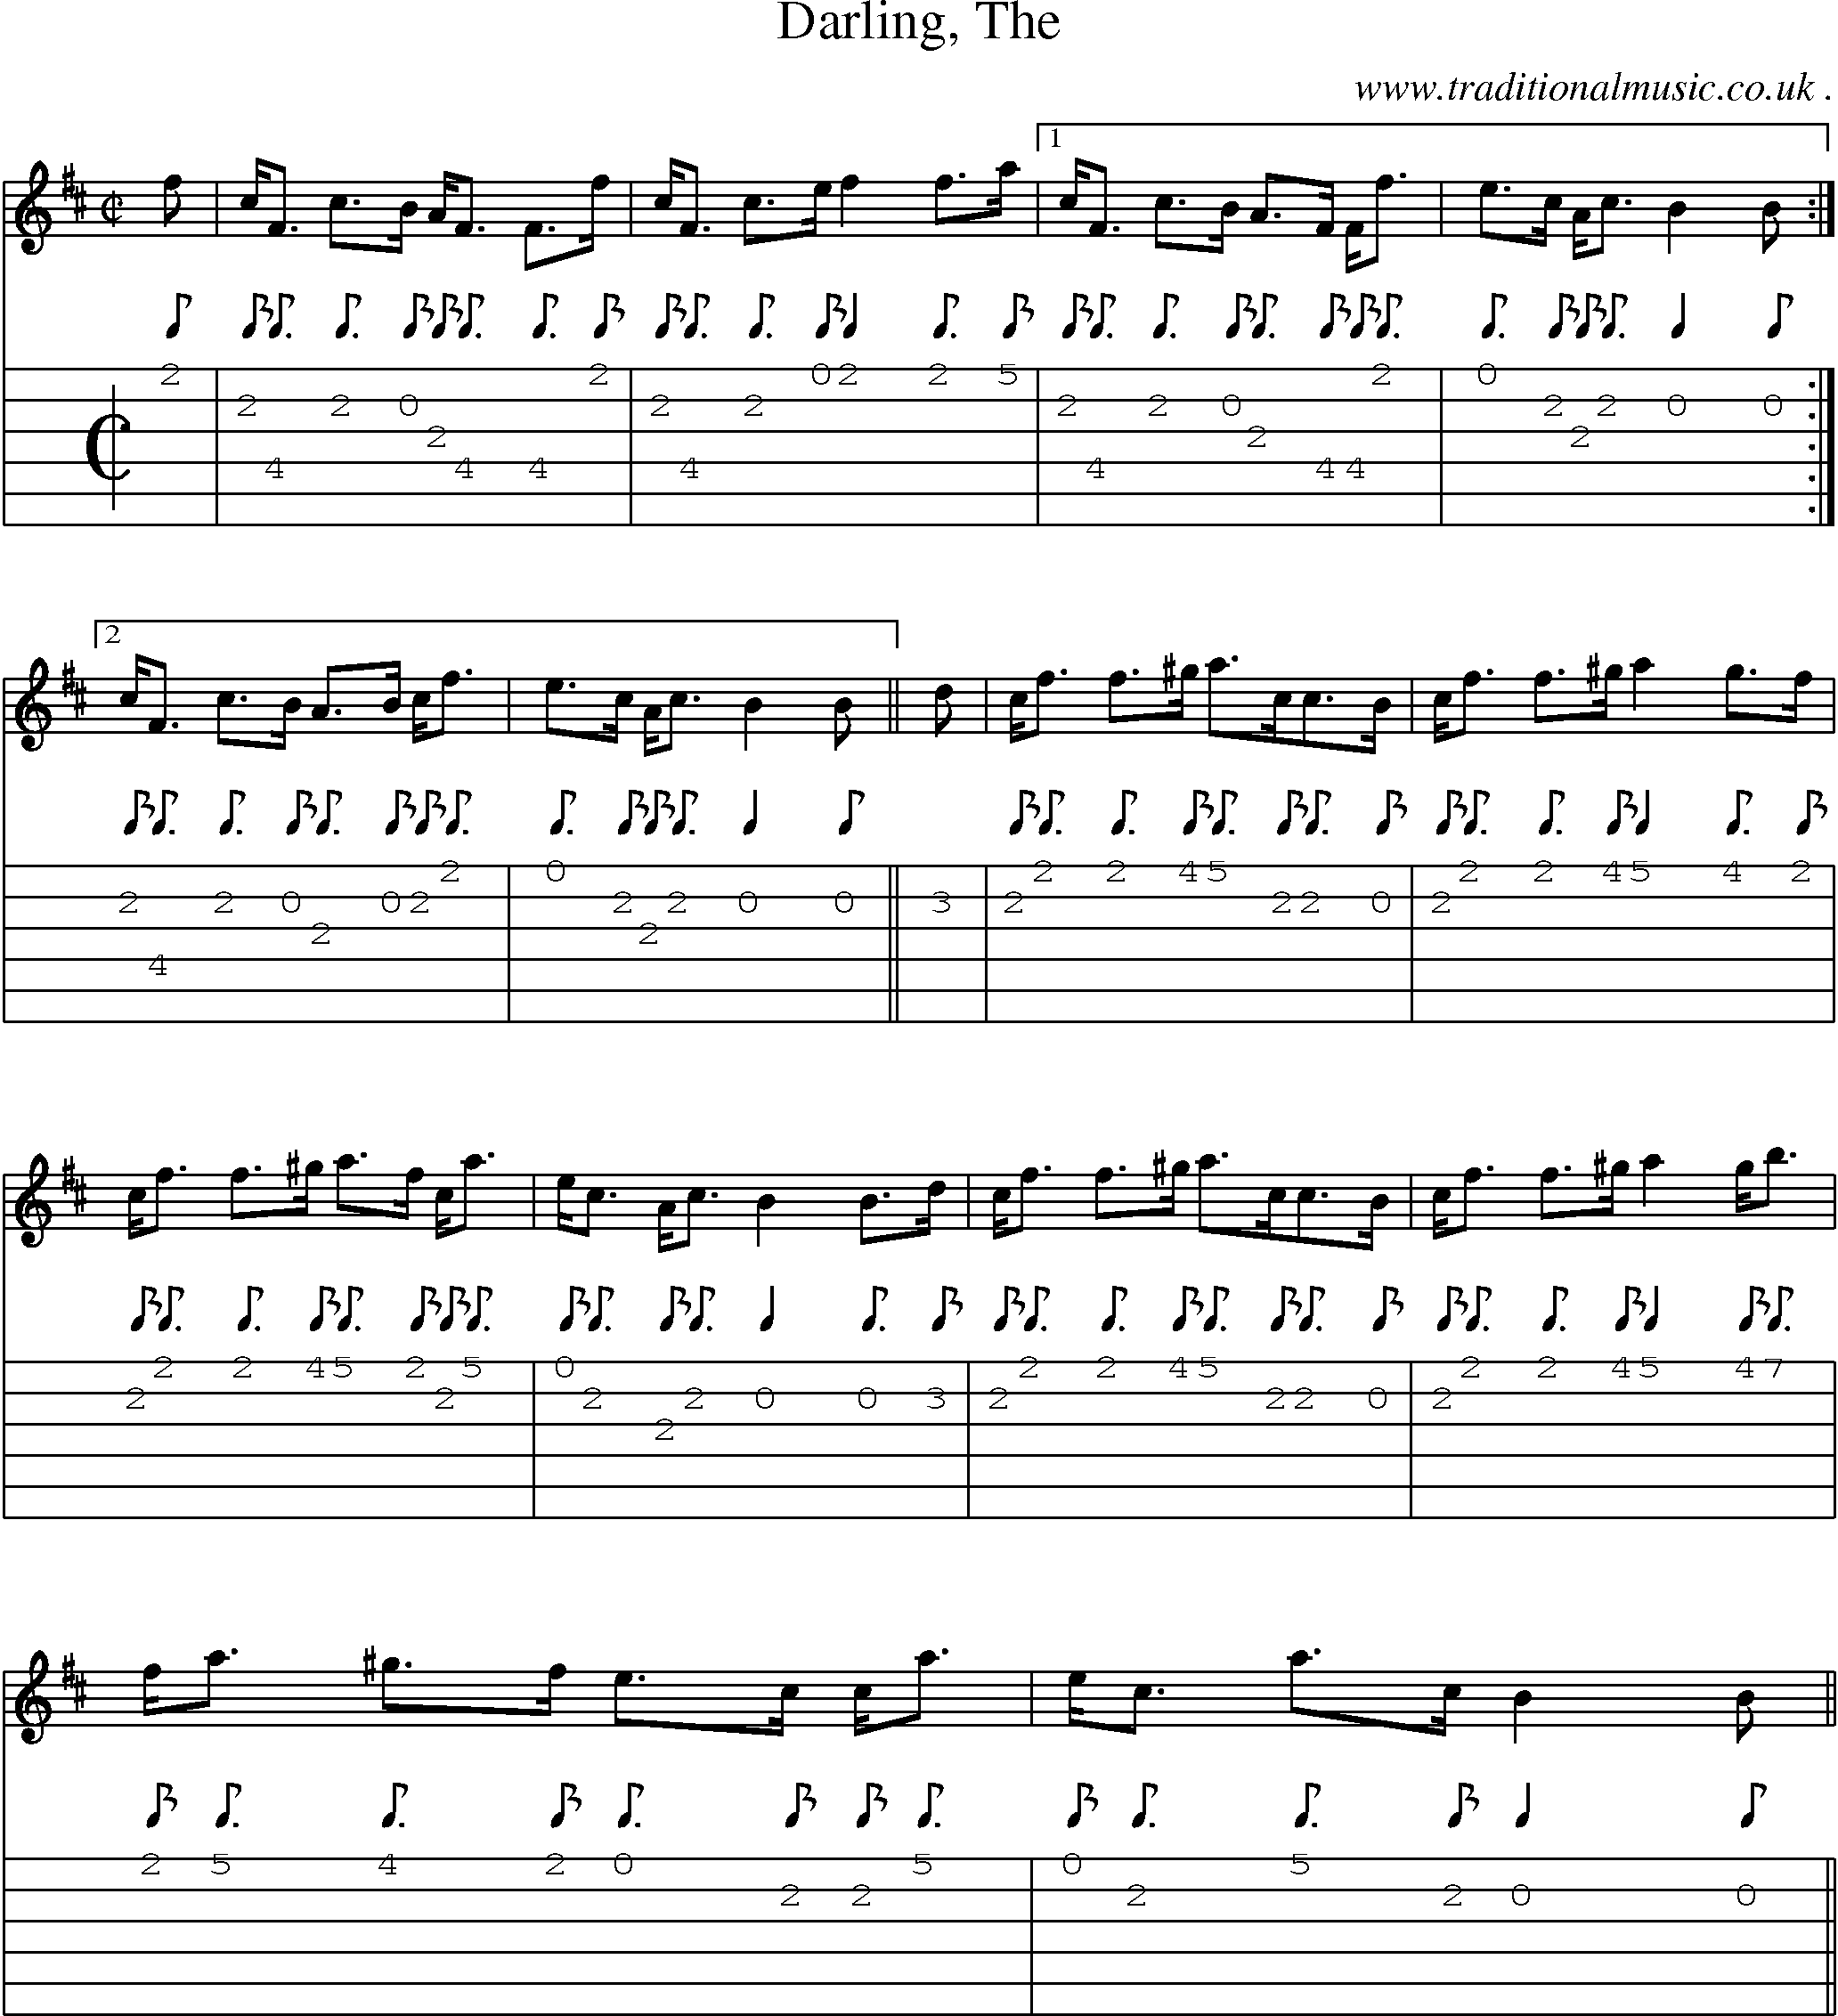 Sheet-music  score, Chords and Guitar Tabs for Darling The